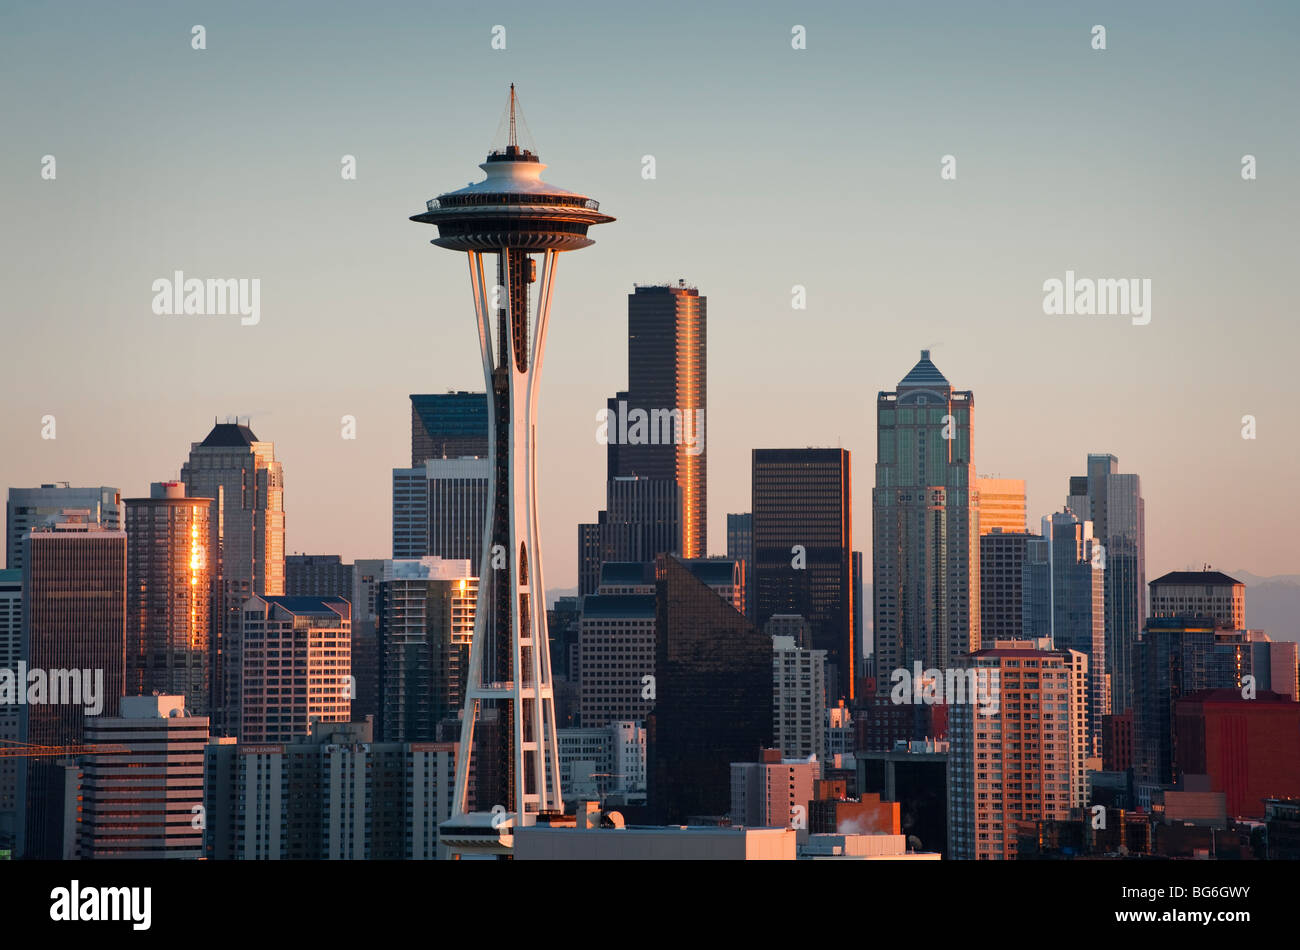 Bless international City Viewed From Queen Anne Hill, Space Needle,  Seattle, King County, Washington State On Canvas Print